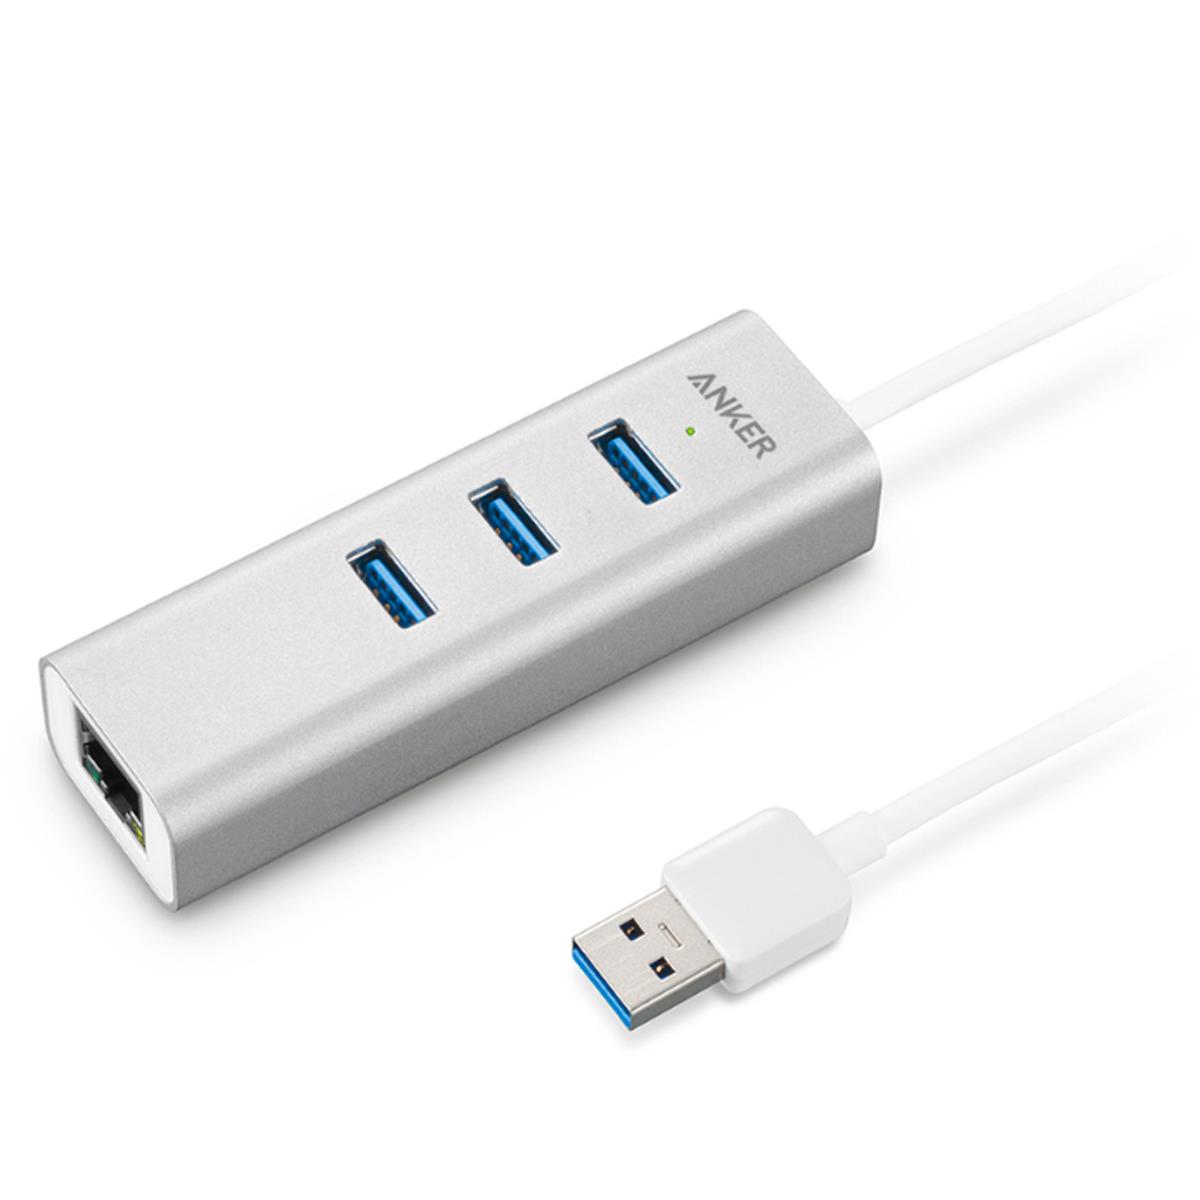 Image of Anker Aluminum 3-Port USB 3.0 and Ethernet Hub with 1.3' Cable